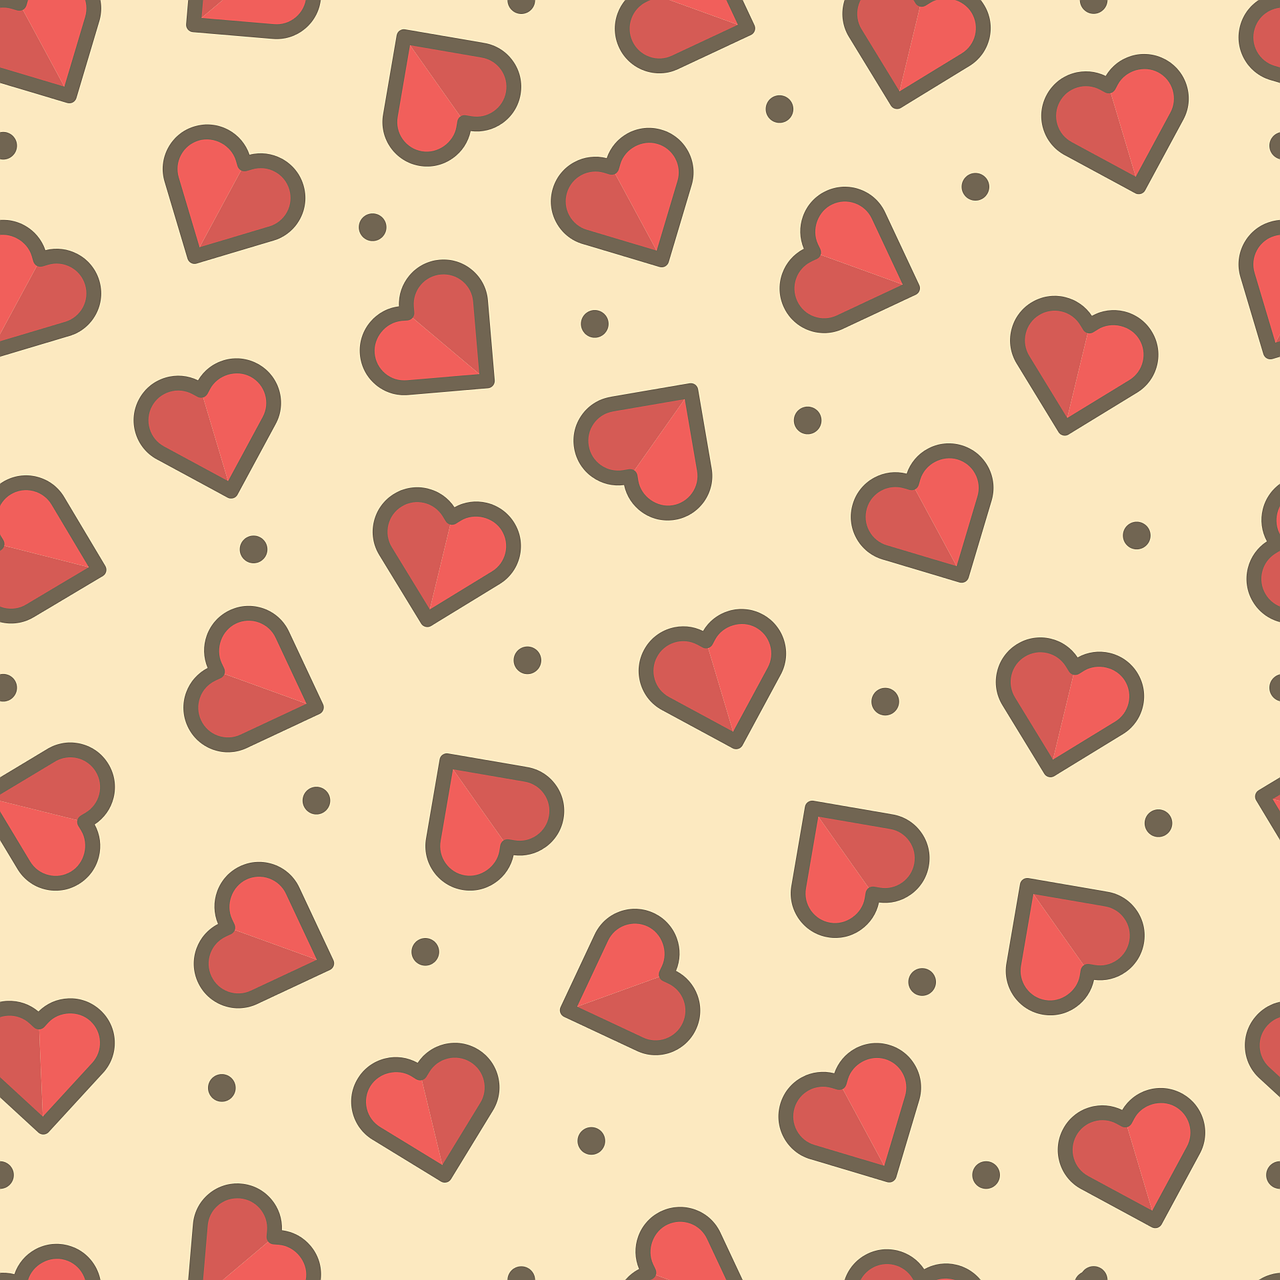 a pattern of red hearts on a beige background, tumblr, background image, toys, created in adobe illustrator, heartstone